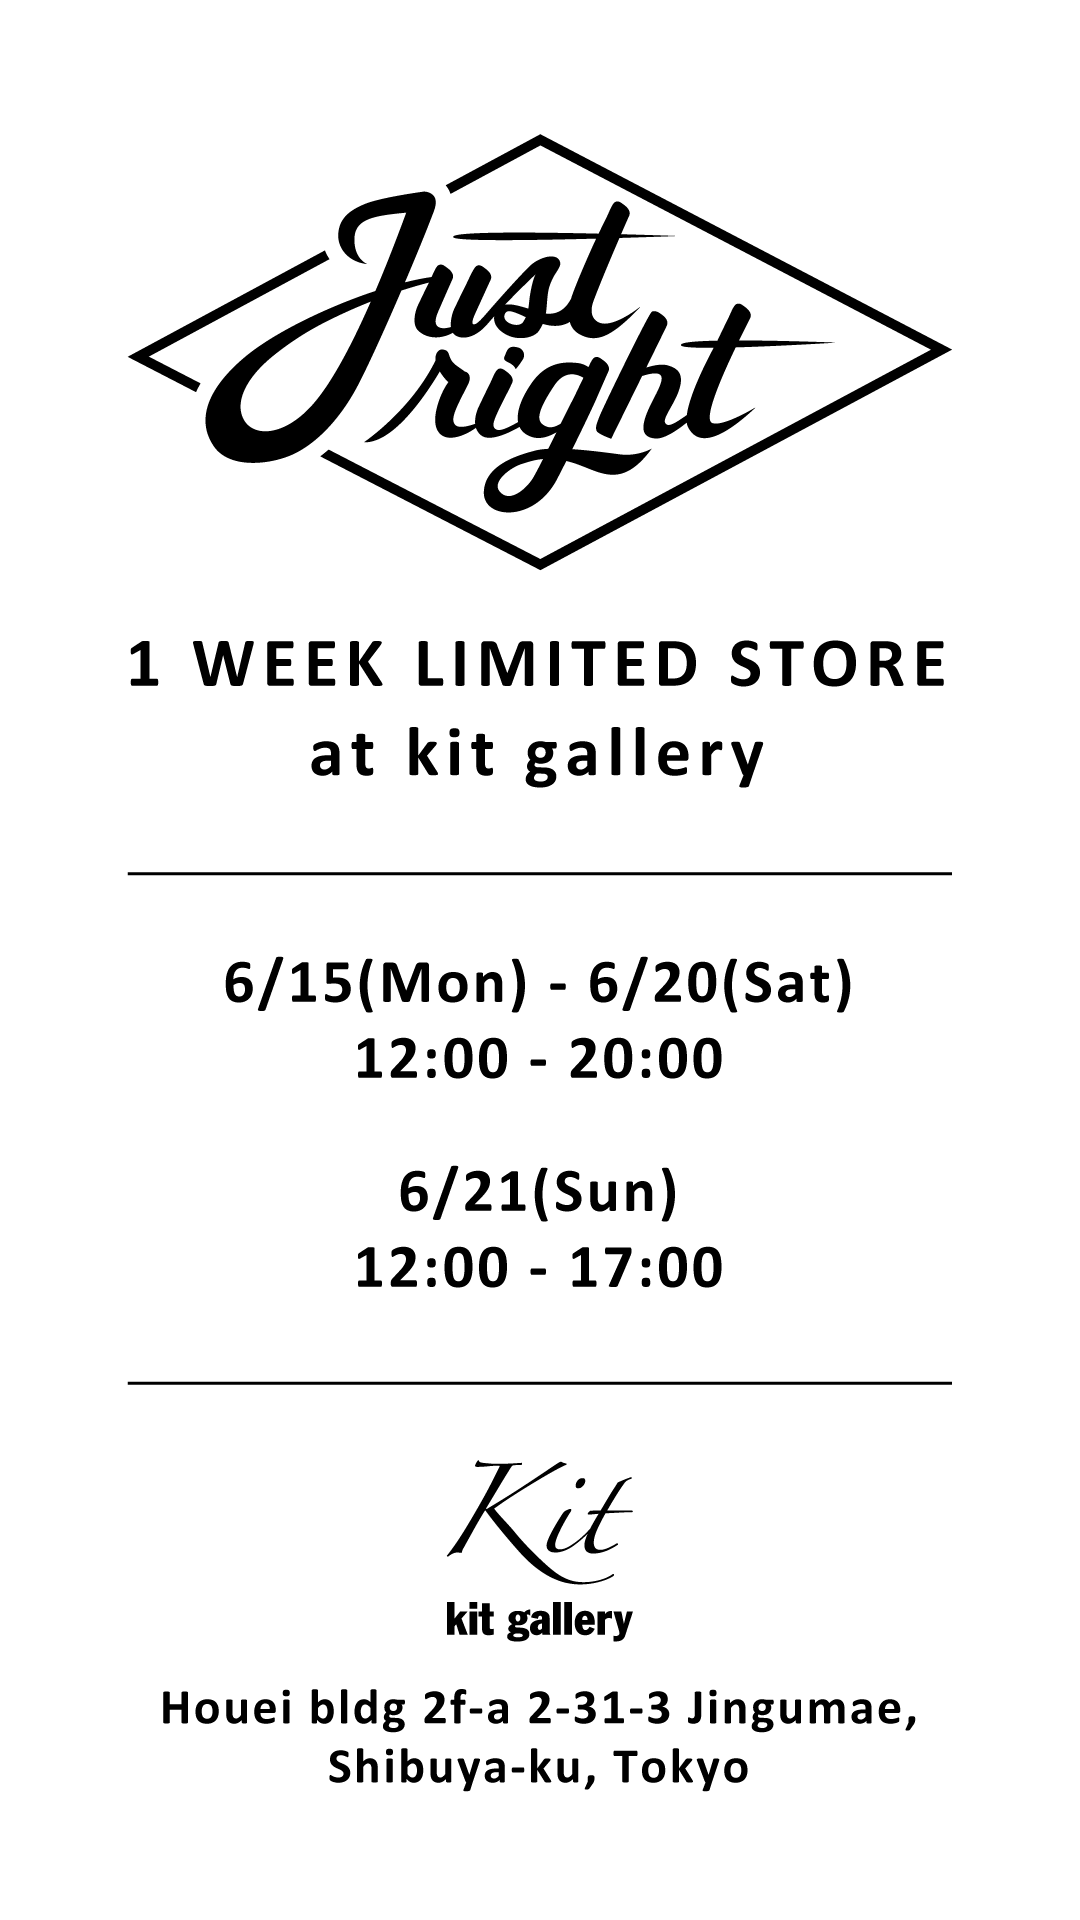 http://kit-gallery.com/schedule/files/story01.png